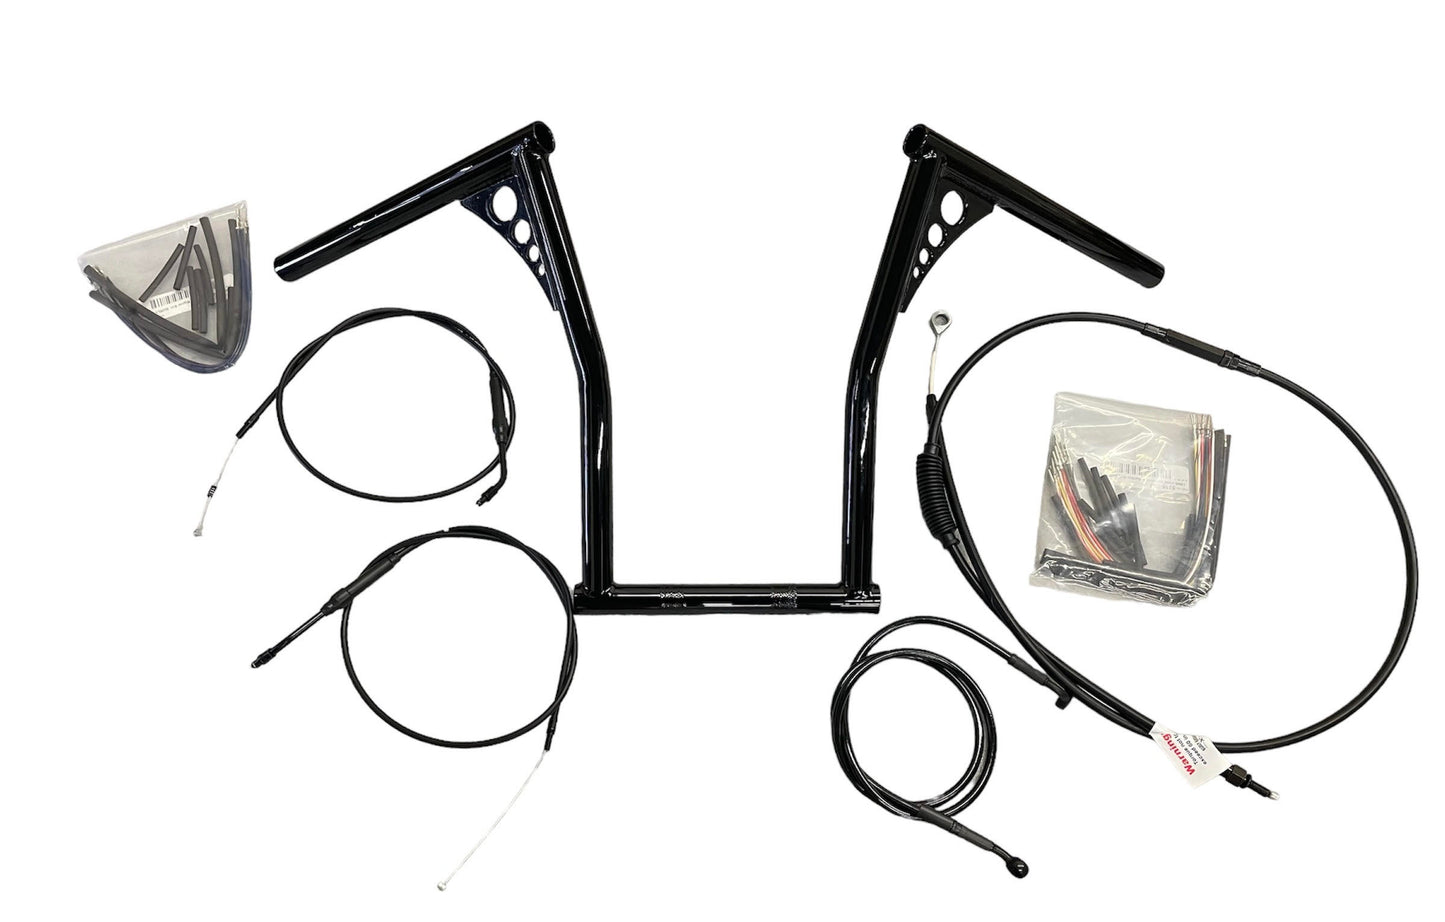 HOLEY ROLLER handlebars & cable kit for 1996-2017 Dyna(FXD)